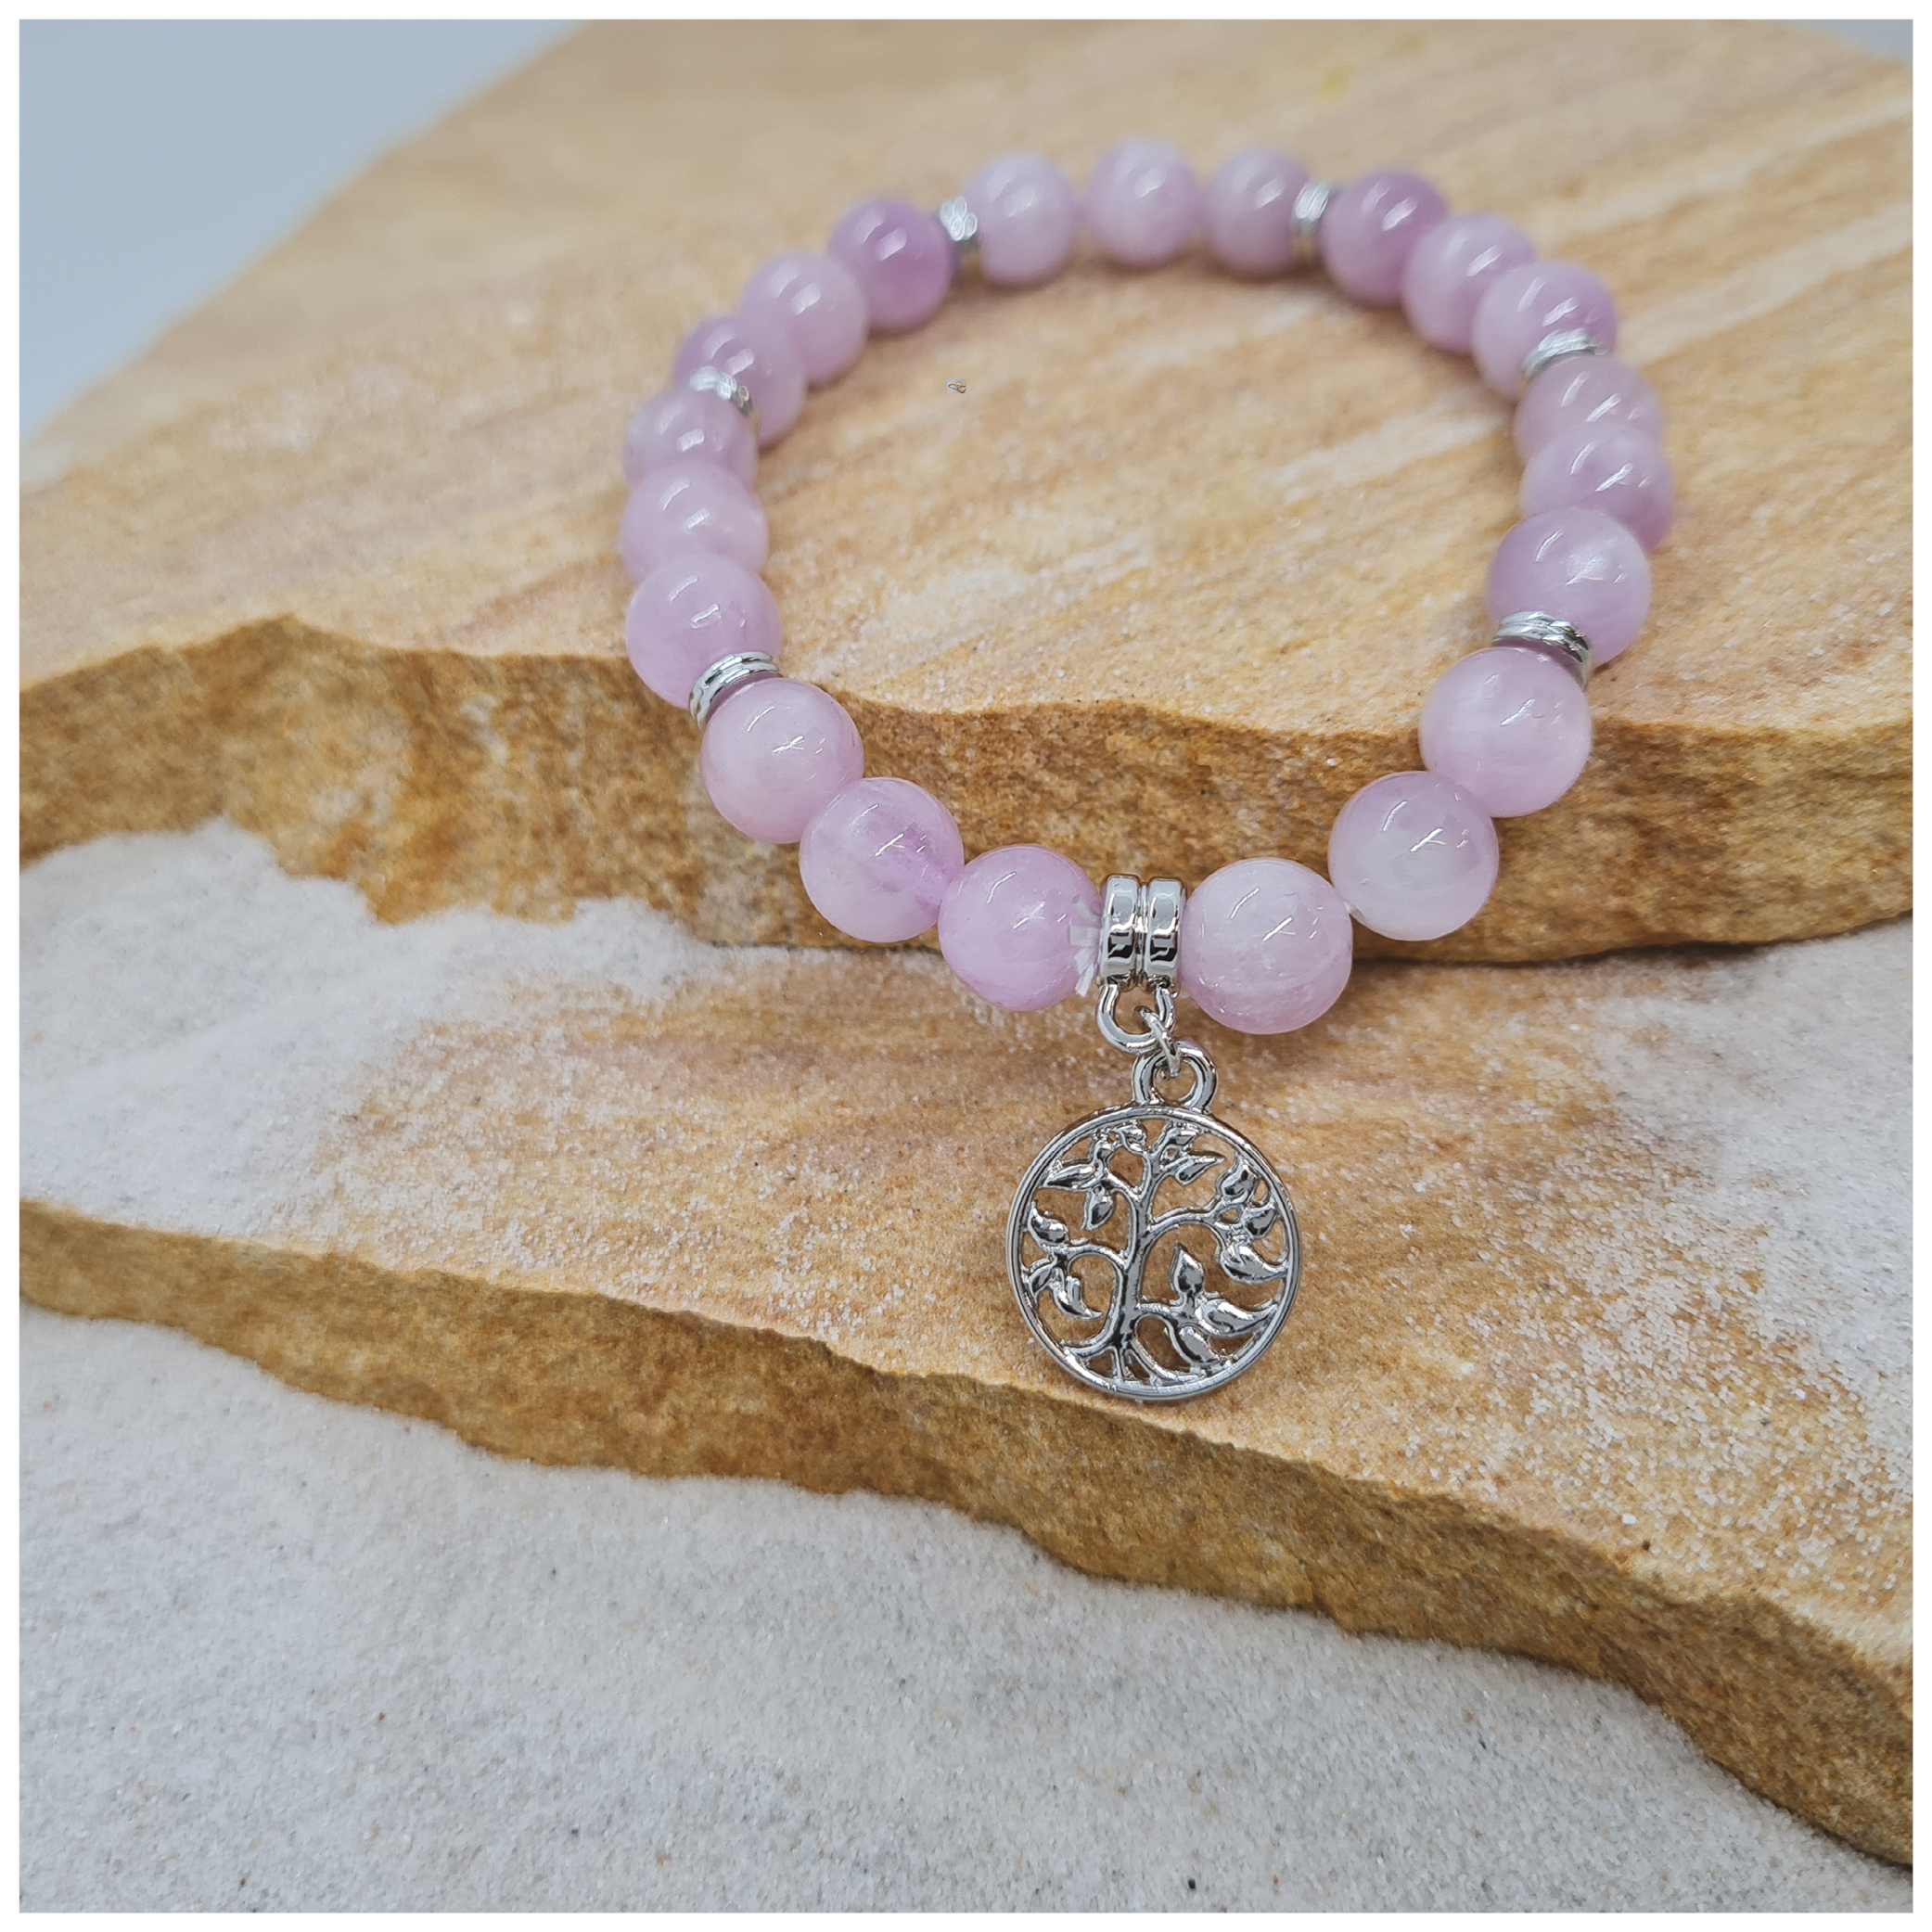 Kunzite 8mm crystal bead bracelet with silver tree of life charm